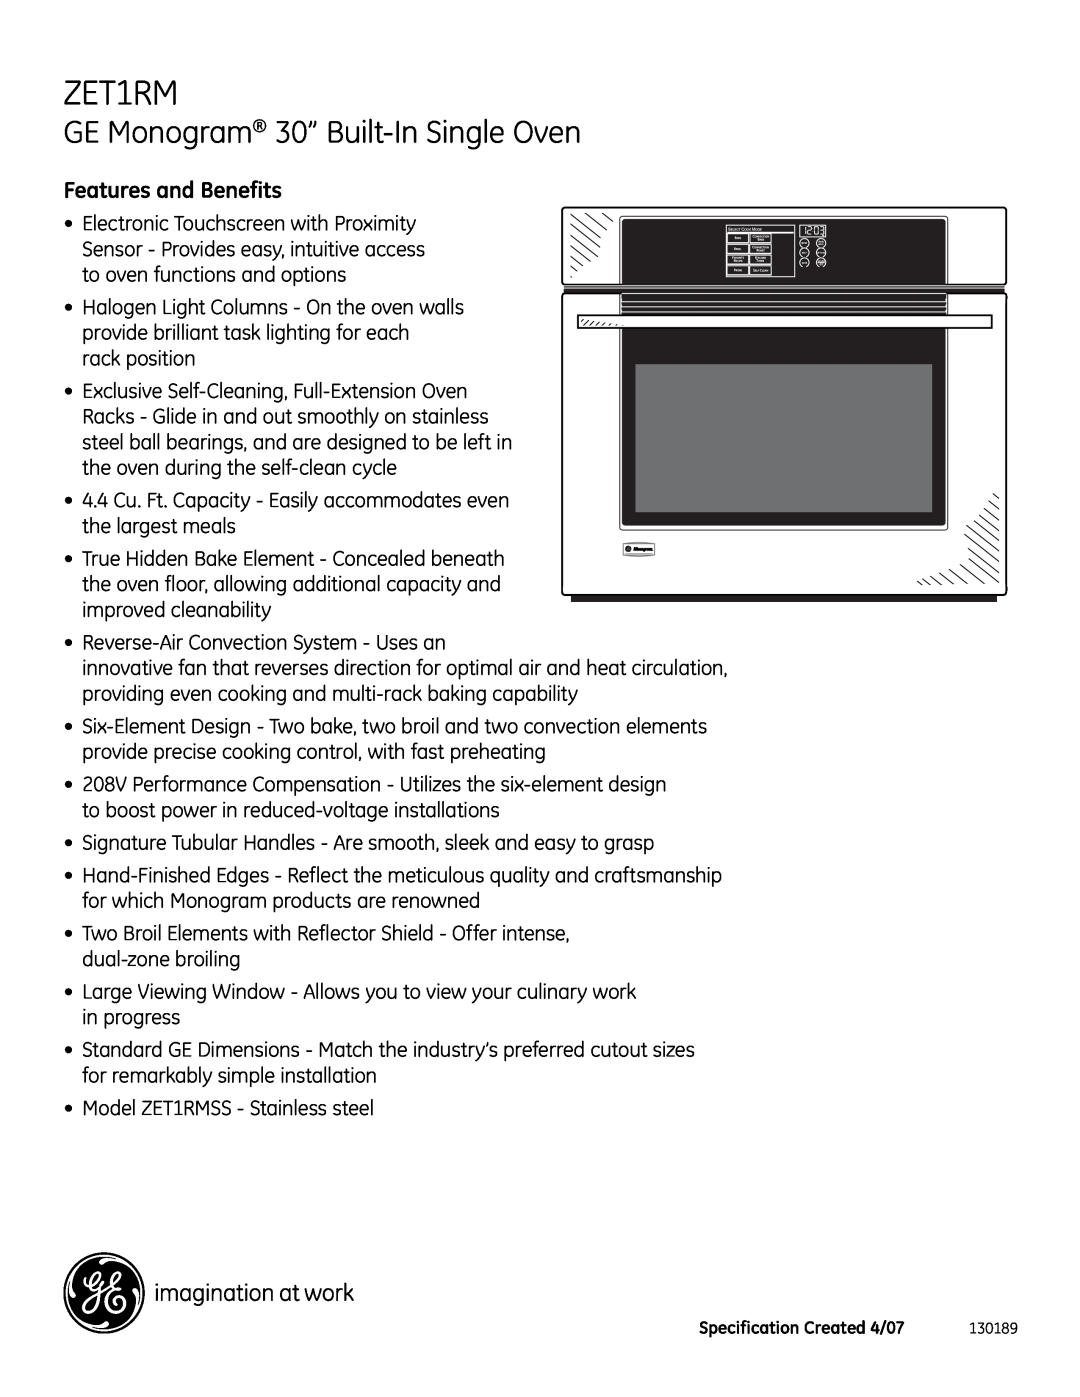 GE Monogram ZET1RM GE Monogram 30” Built-In Single Oven, Features and Benefits, Electronic Touchscreen with Proximity 